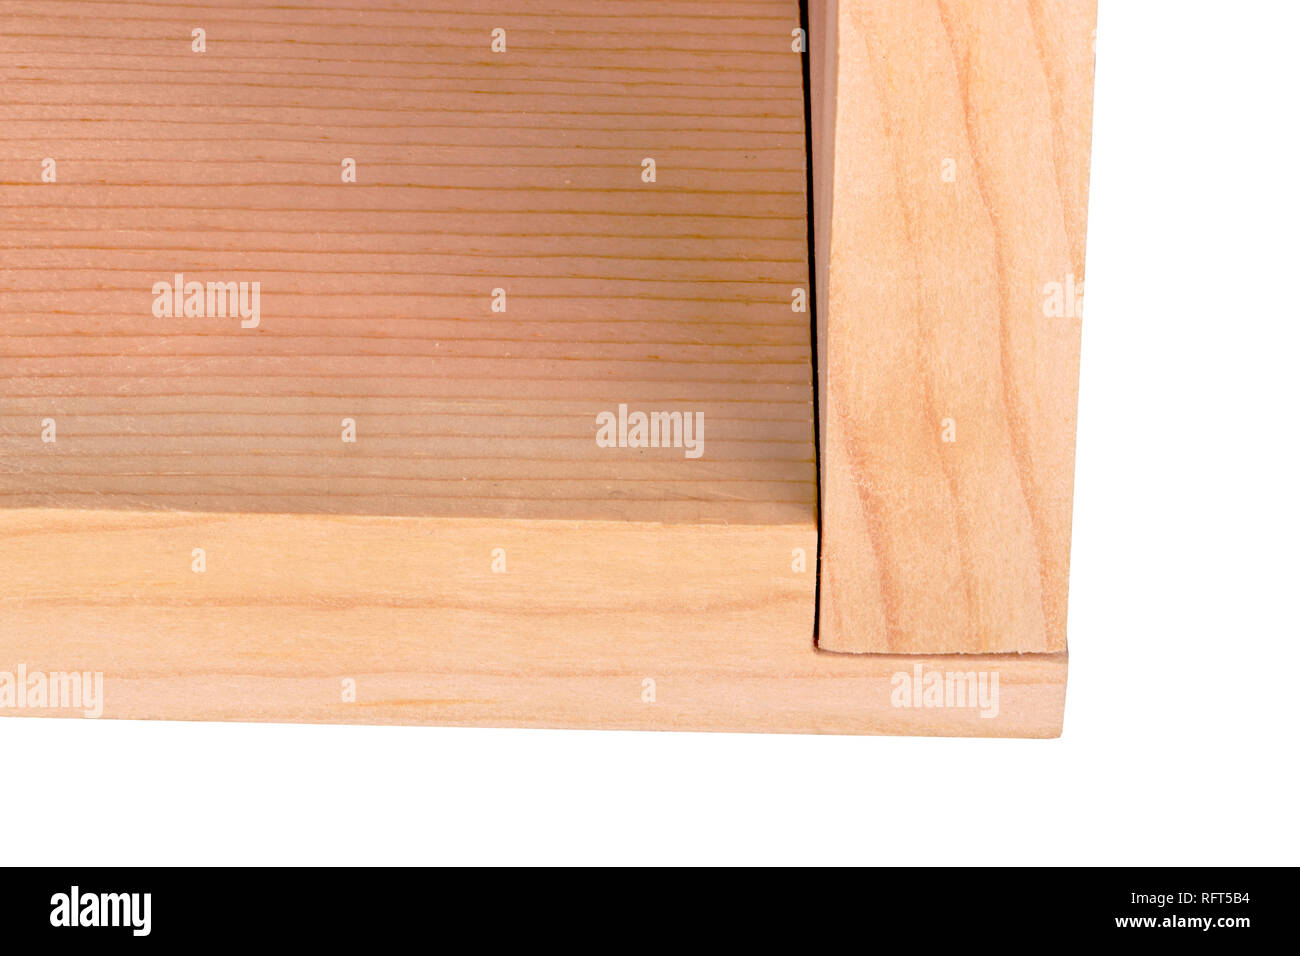 close-up-of-two-boards-forming-a-woodworking-rabbet-or-rebate-joint